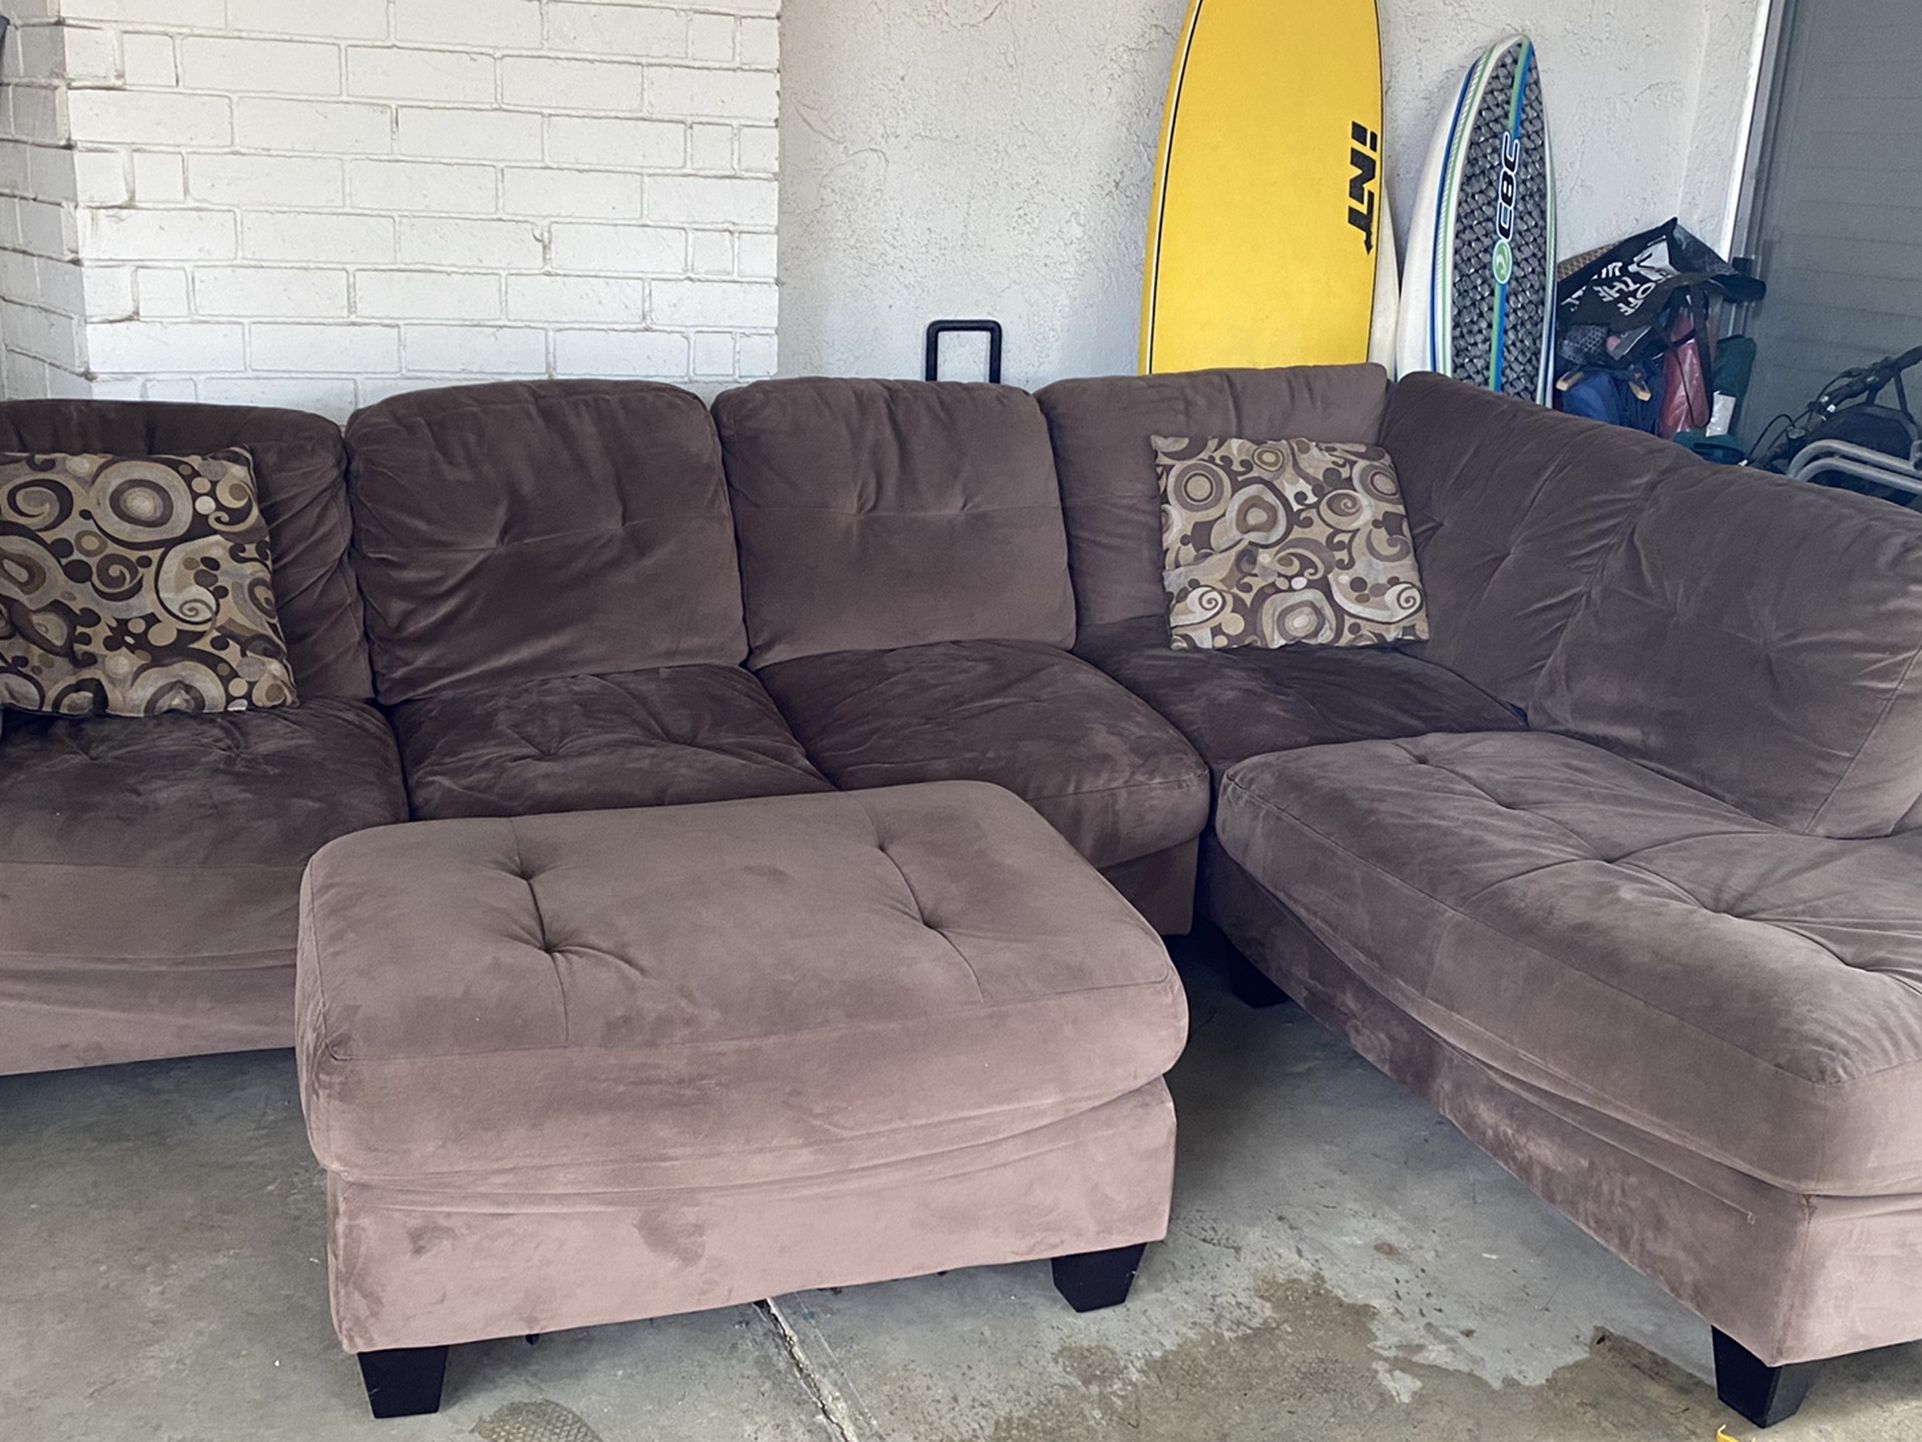 FREE Huge Brown Very Used Comfy Couch